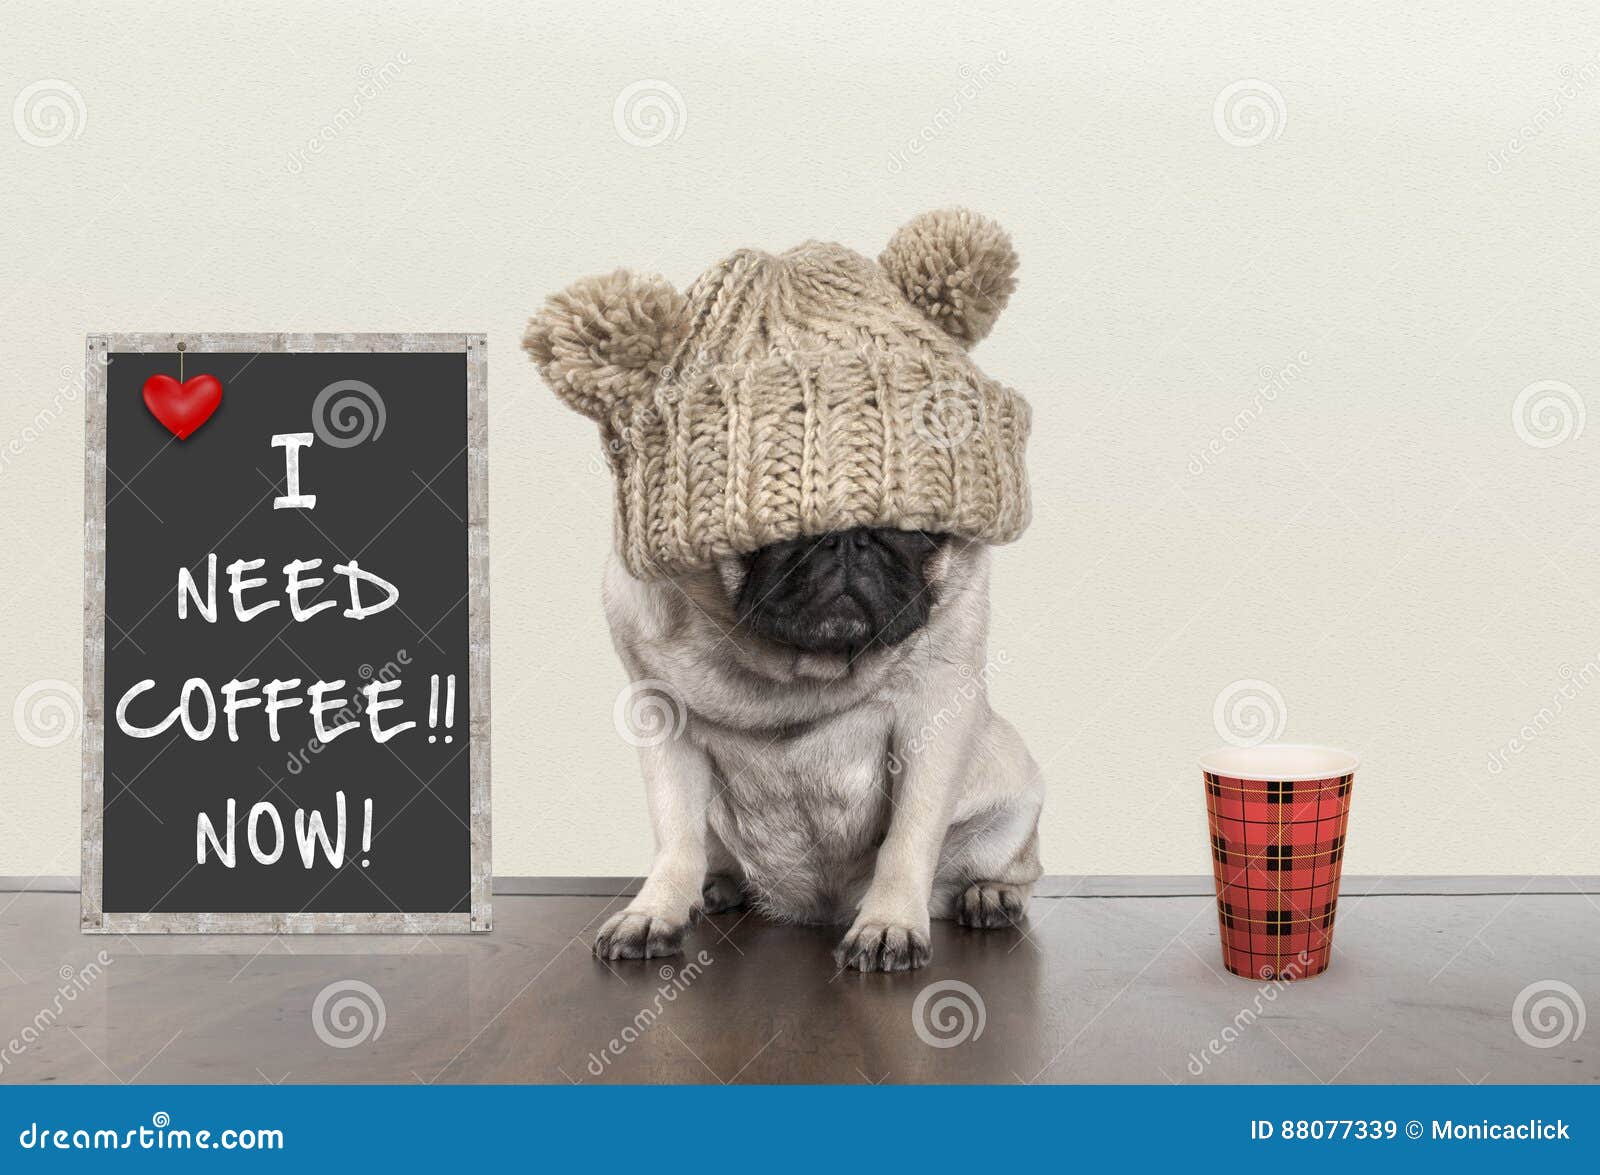 cute little pug puppy dog with bad morning mood, sitting next to blackboard sign with text i need coffee now, copy space